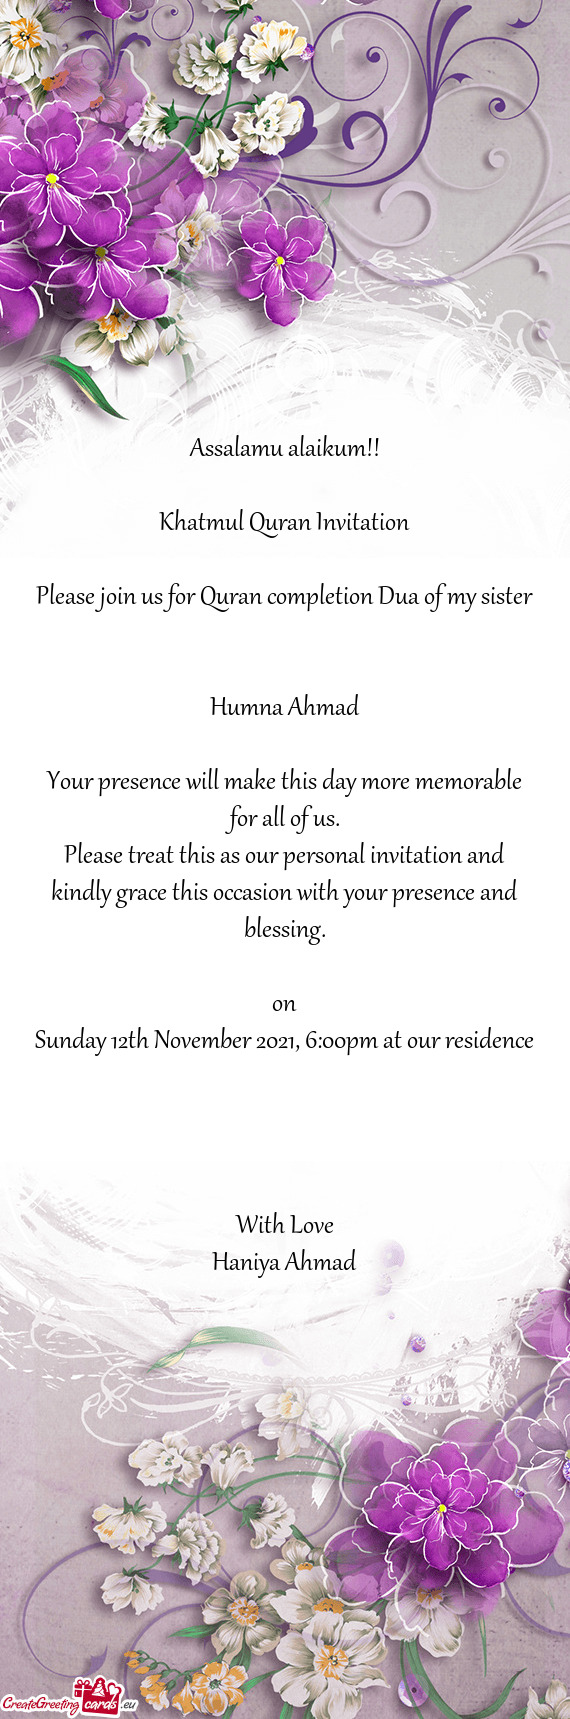 Please join us for Quran completion Dua of my sister